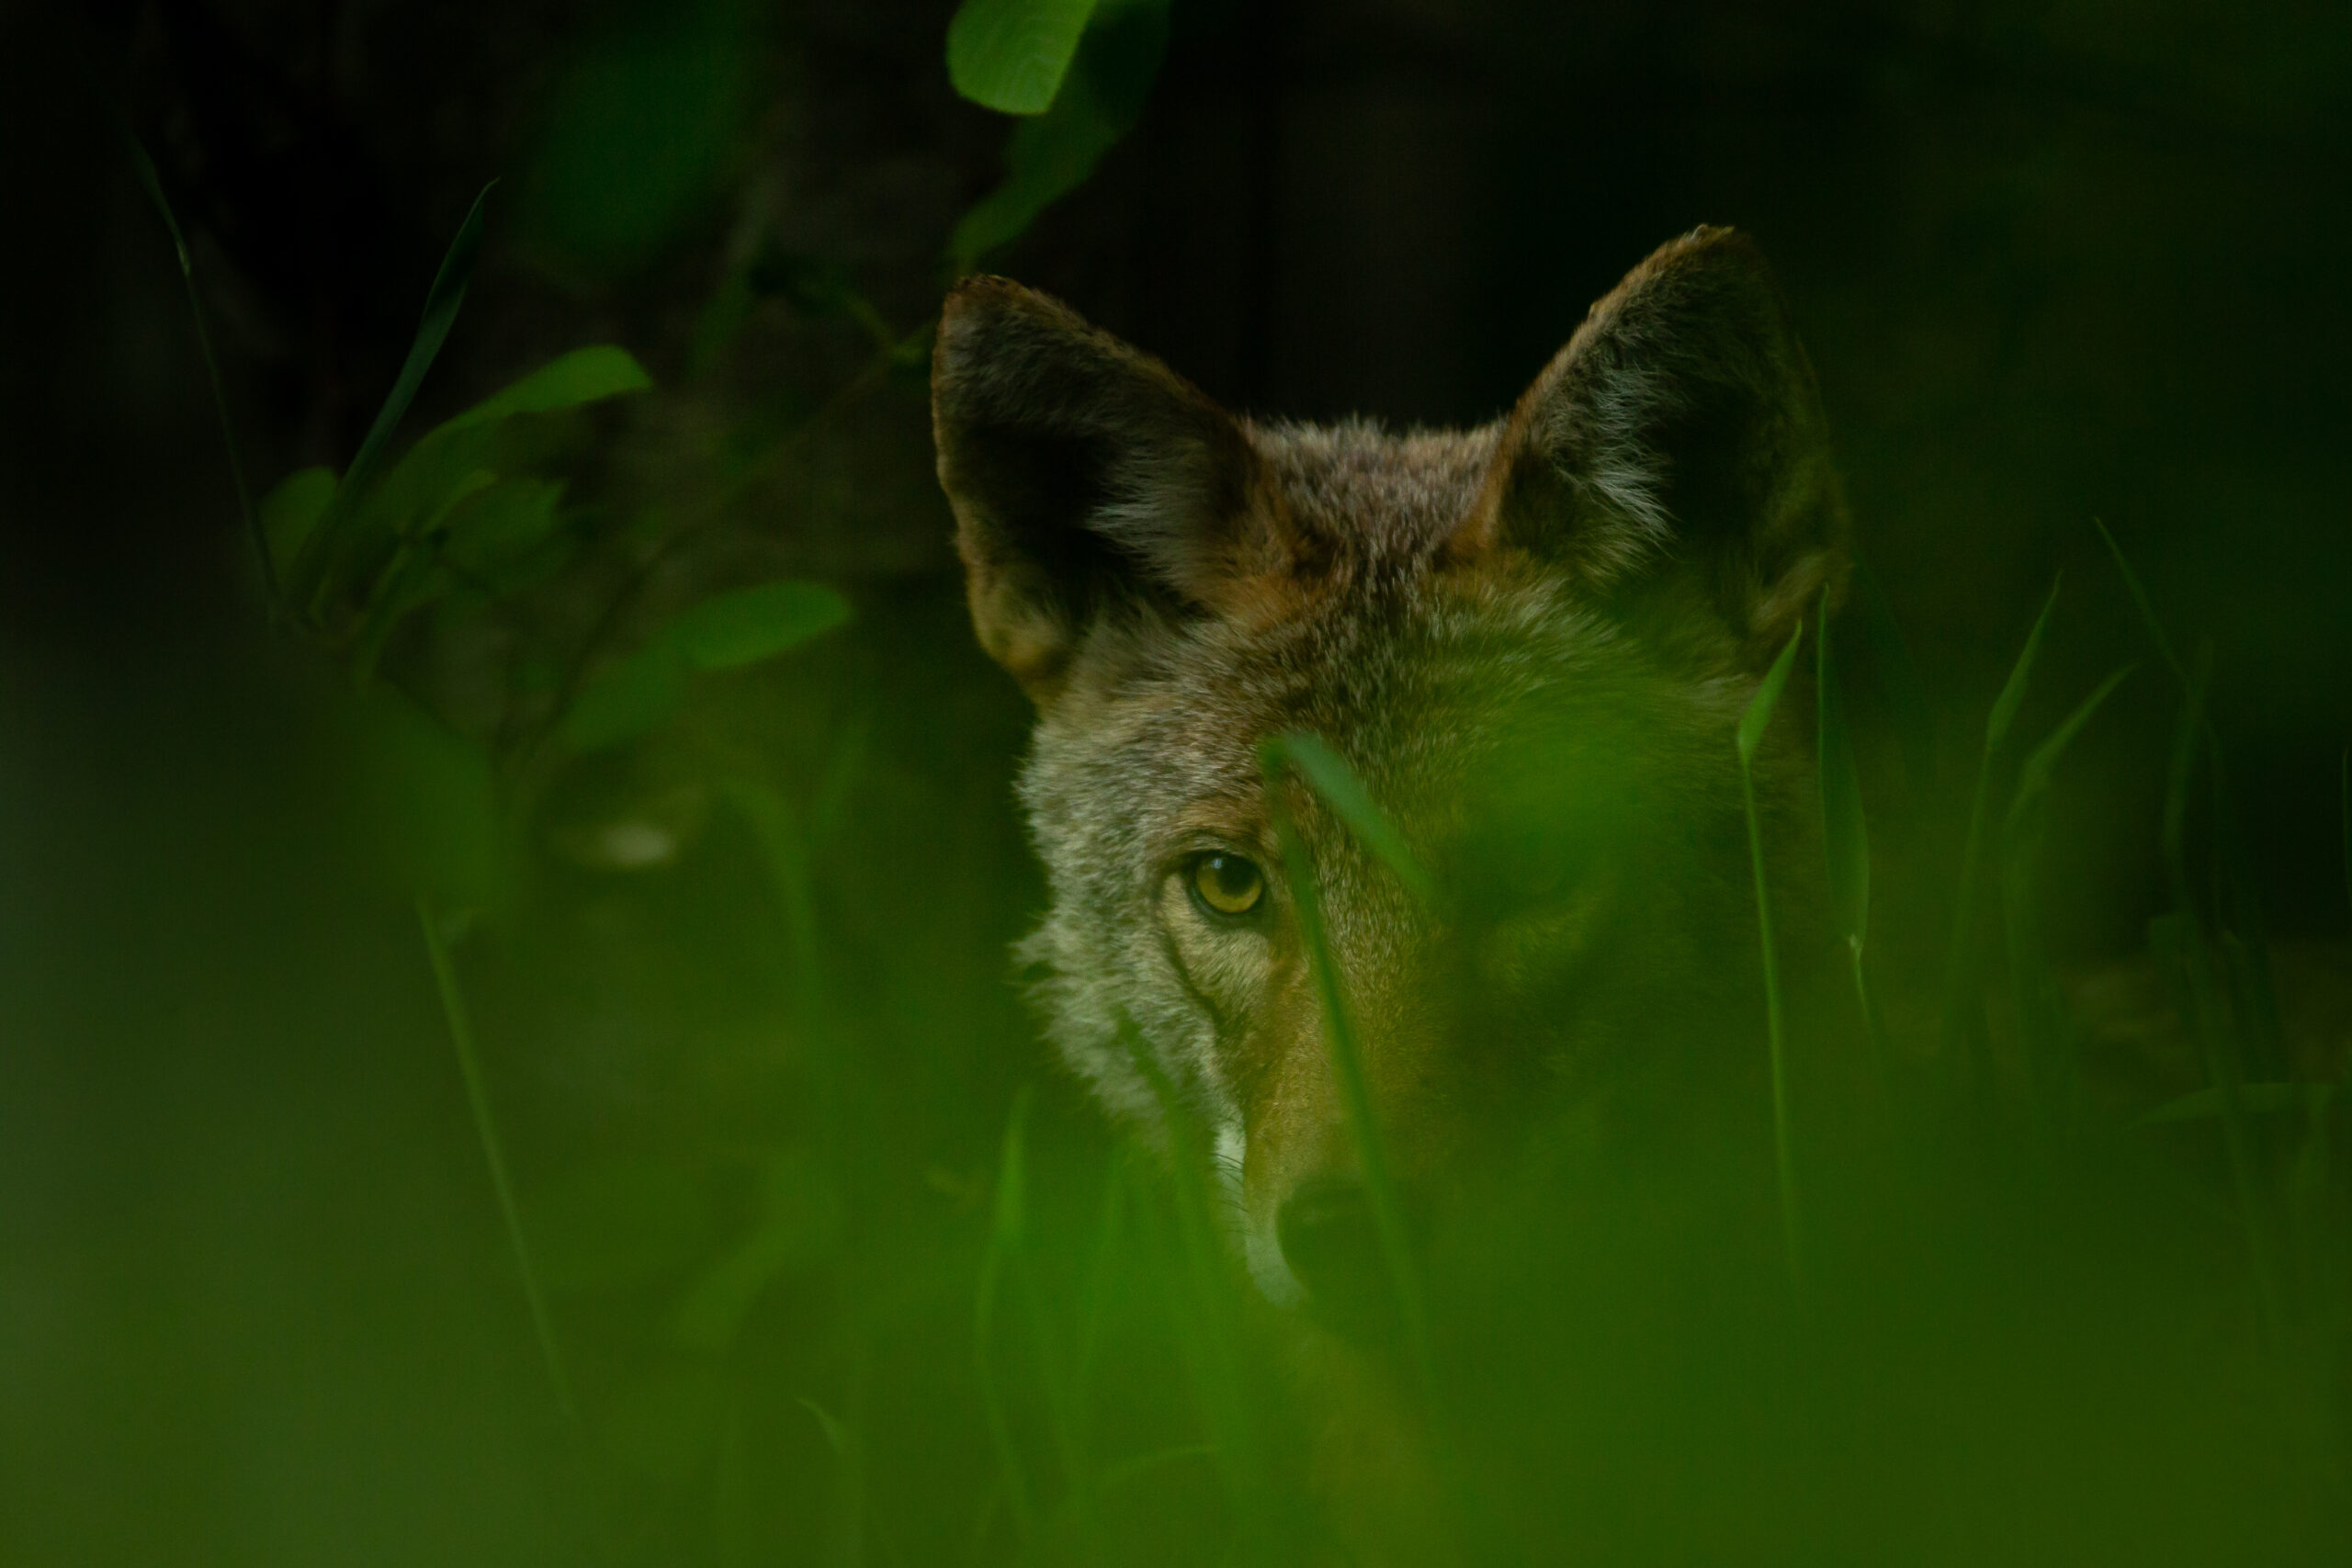 A coyote peers out of the darkness through out of focus grass in the Squamish estuary. At COP15 there will be discussions about the extinction crisis. 